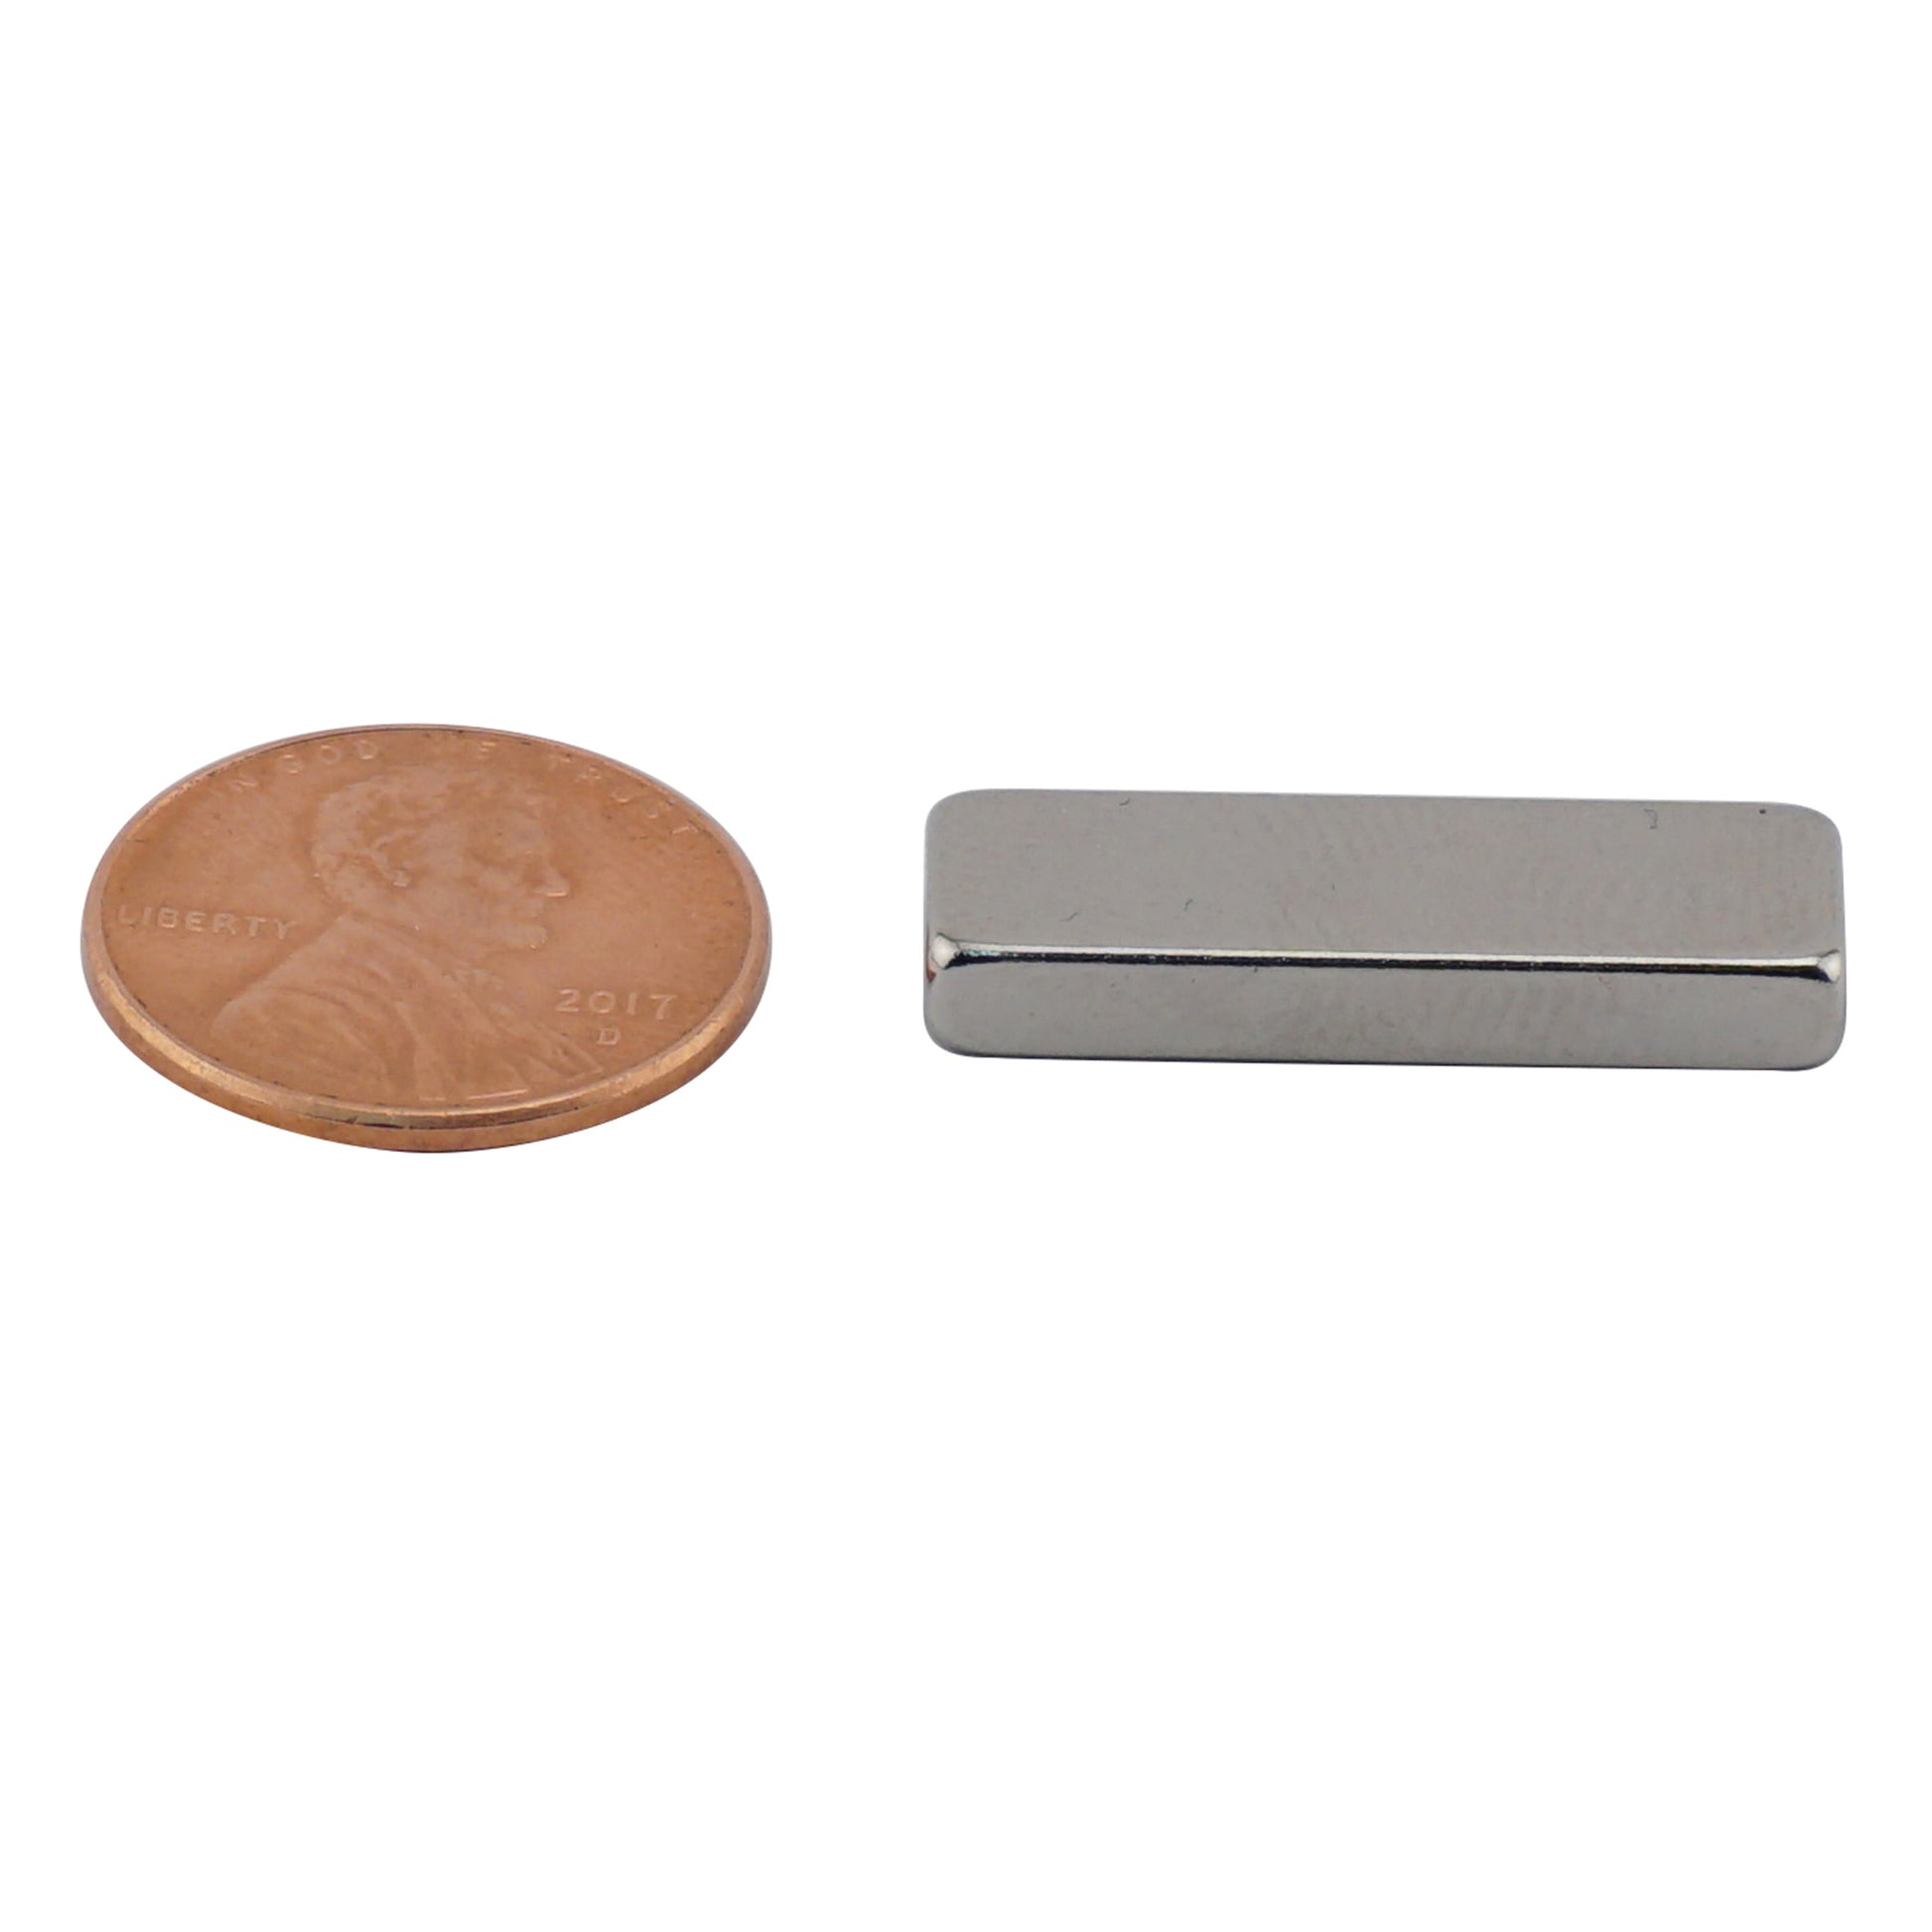 Load image into Gallery viewer, NB15321N-35 Neodymium Block Magnet - Compared to Penny for Size Reference